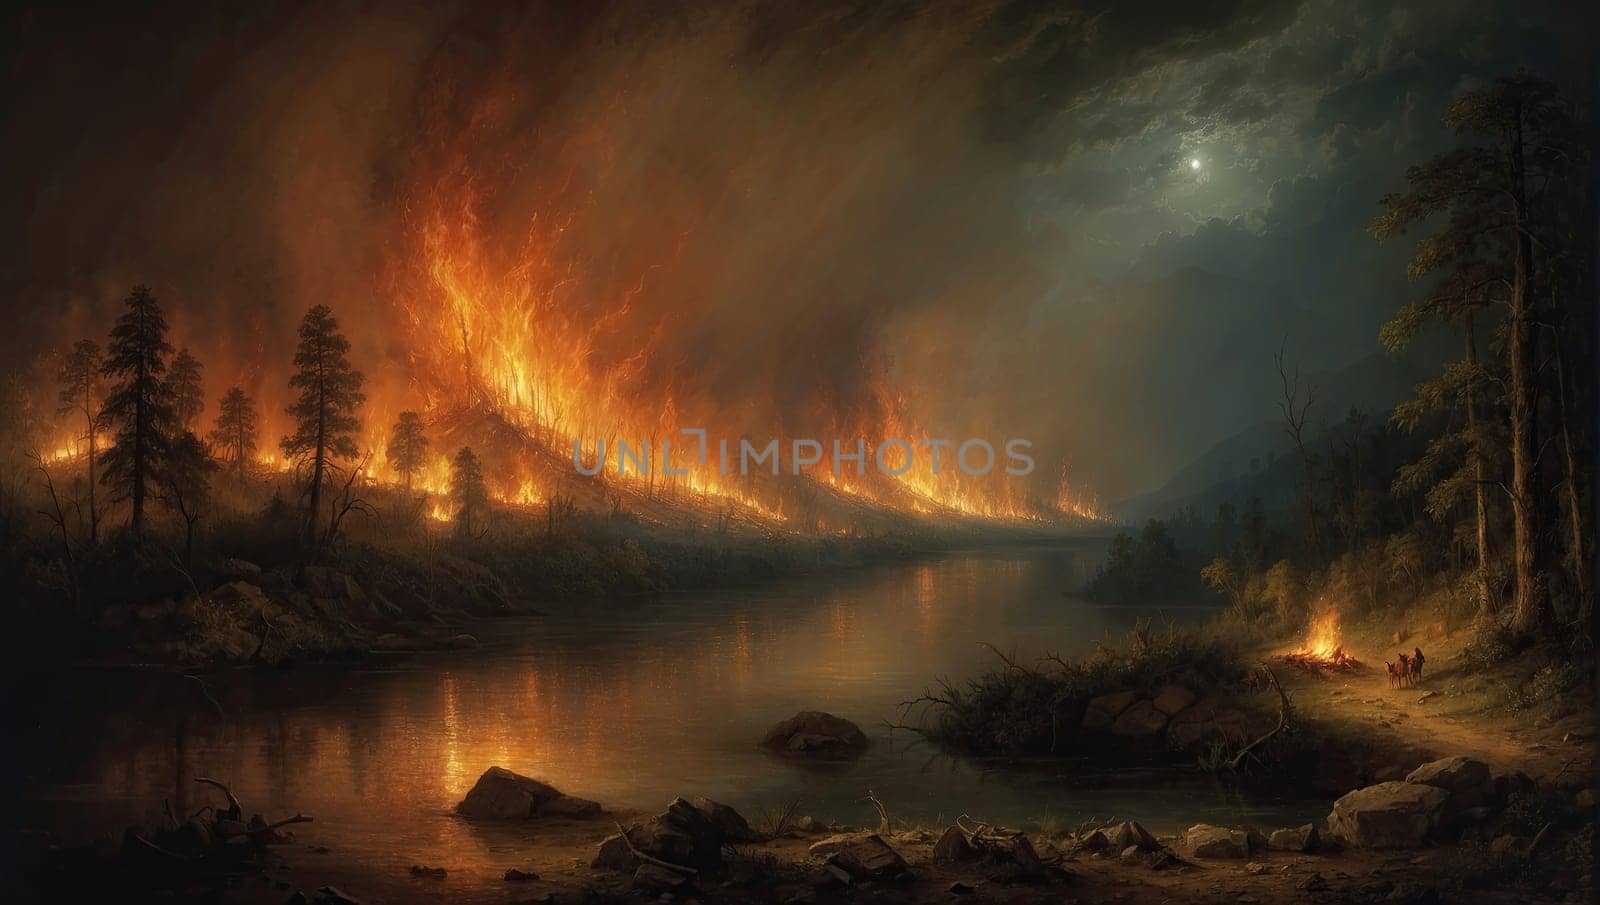 Erupting volcano, burning forests by applesstock